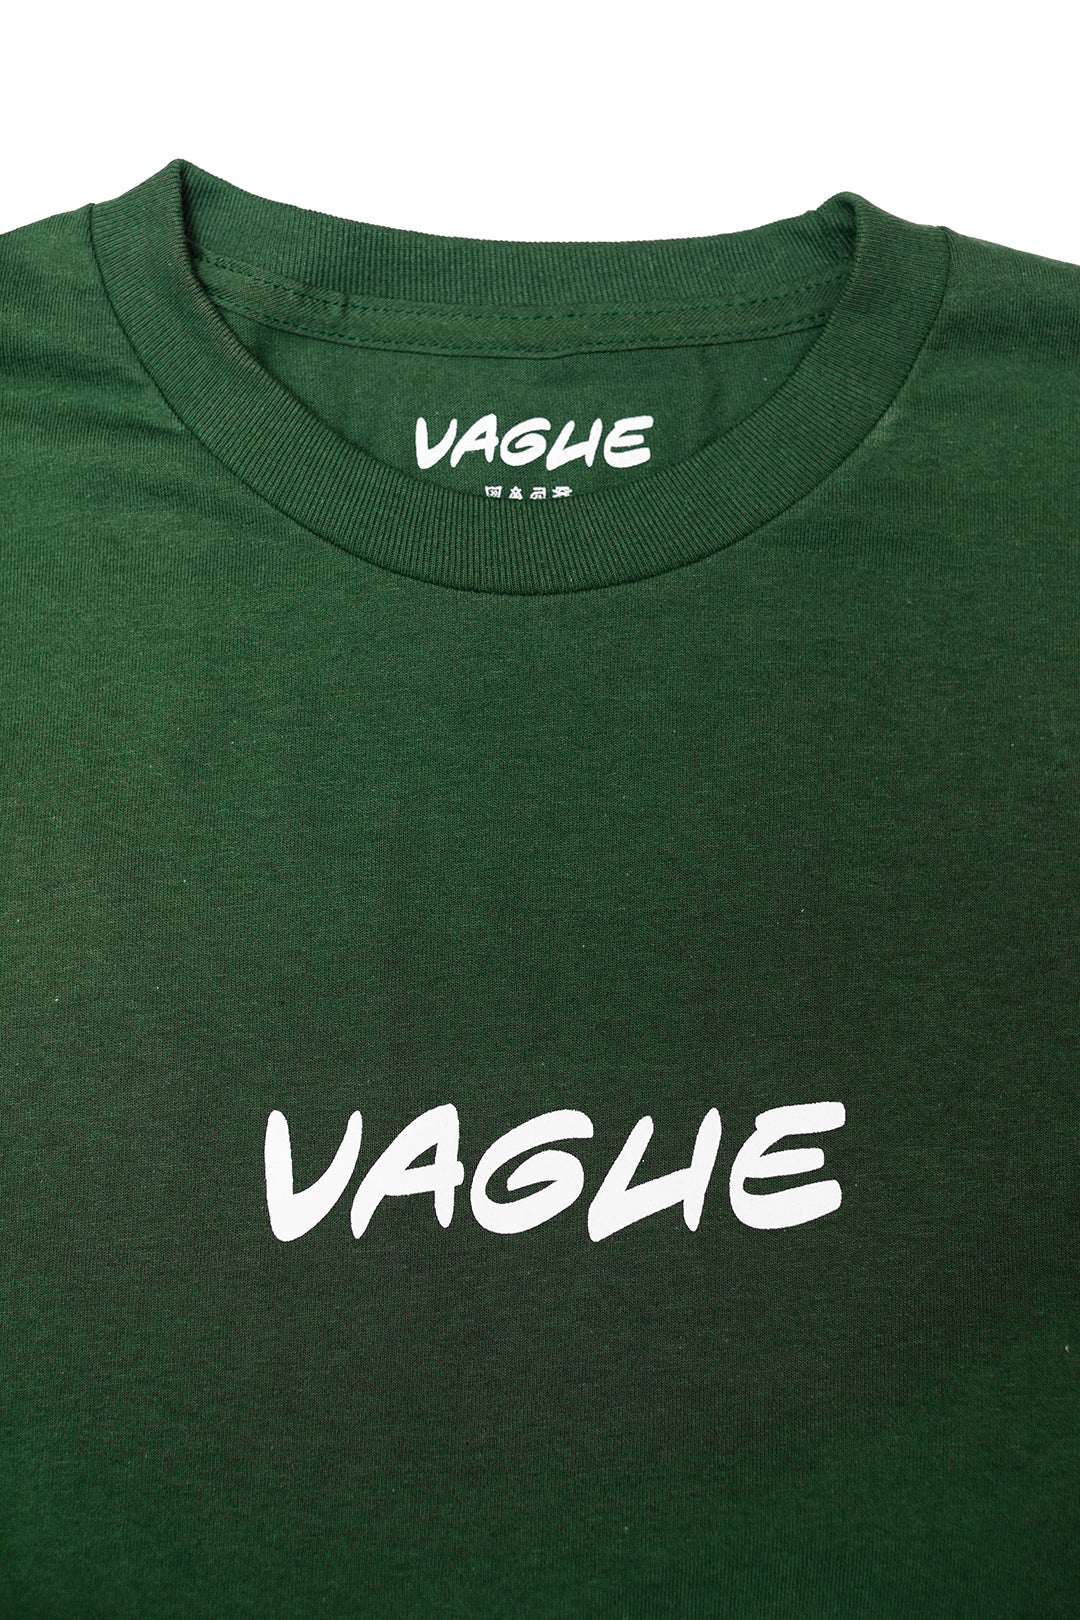 Vague x Serious Adult - Skate Phrases Longsleeve T-shirt - Forest Green.